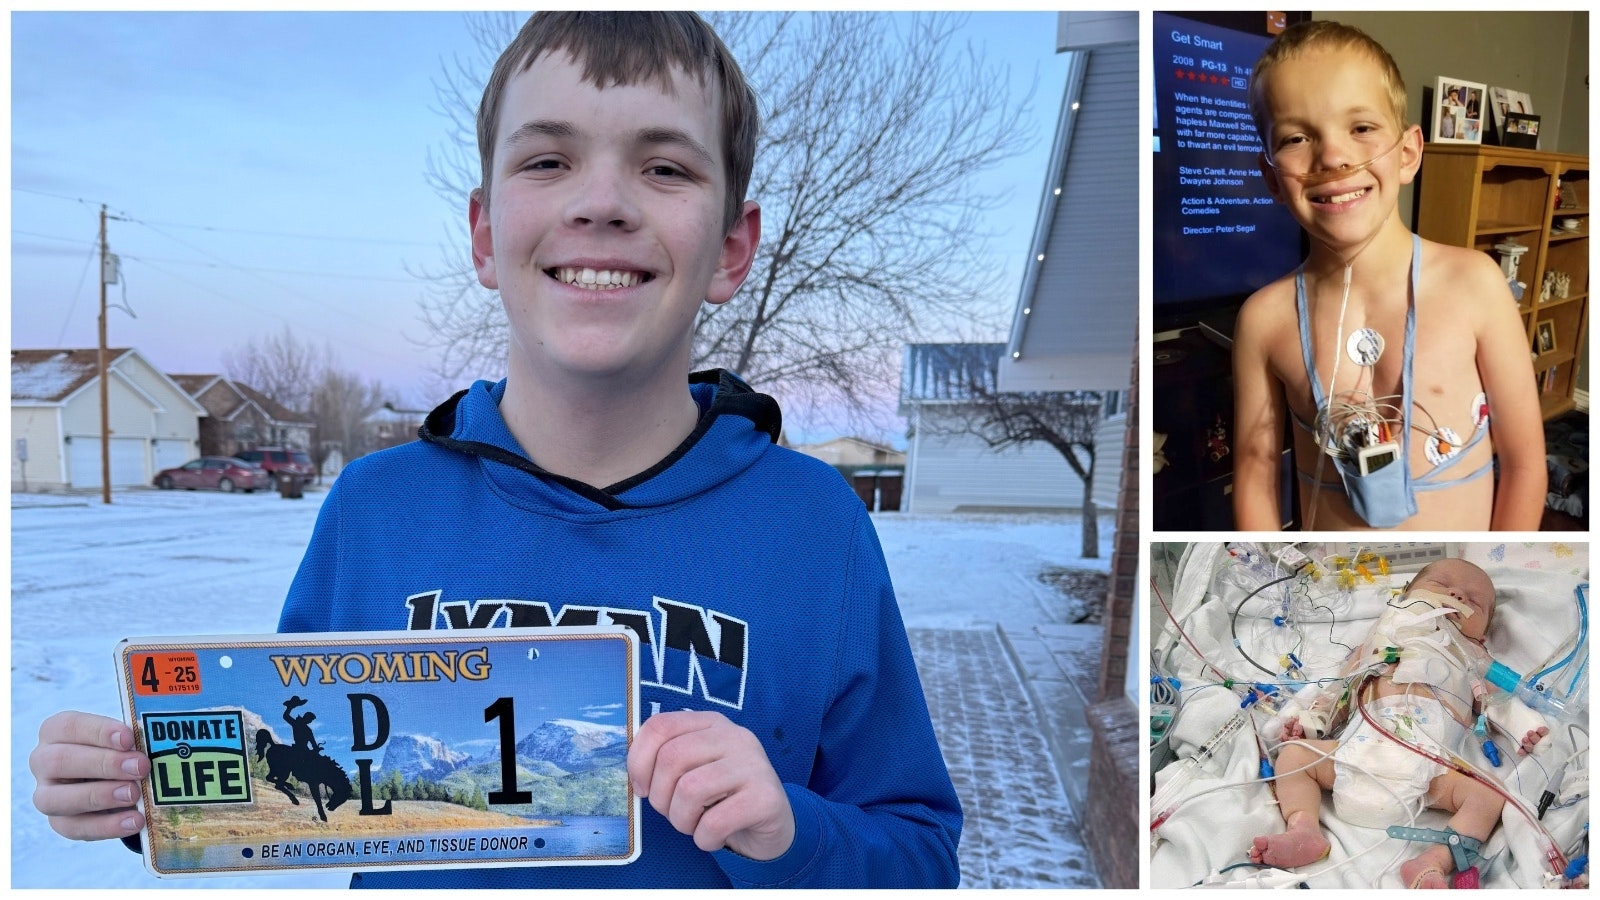 Bryson Quinney, who received a heart transplant in 2020, is pictured with the new Donate Life license plate, which became available in Wyoming on Jan. 1. He was born with half a heart and had several surgeries early in life, including a heart transplant.